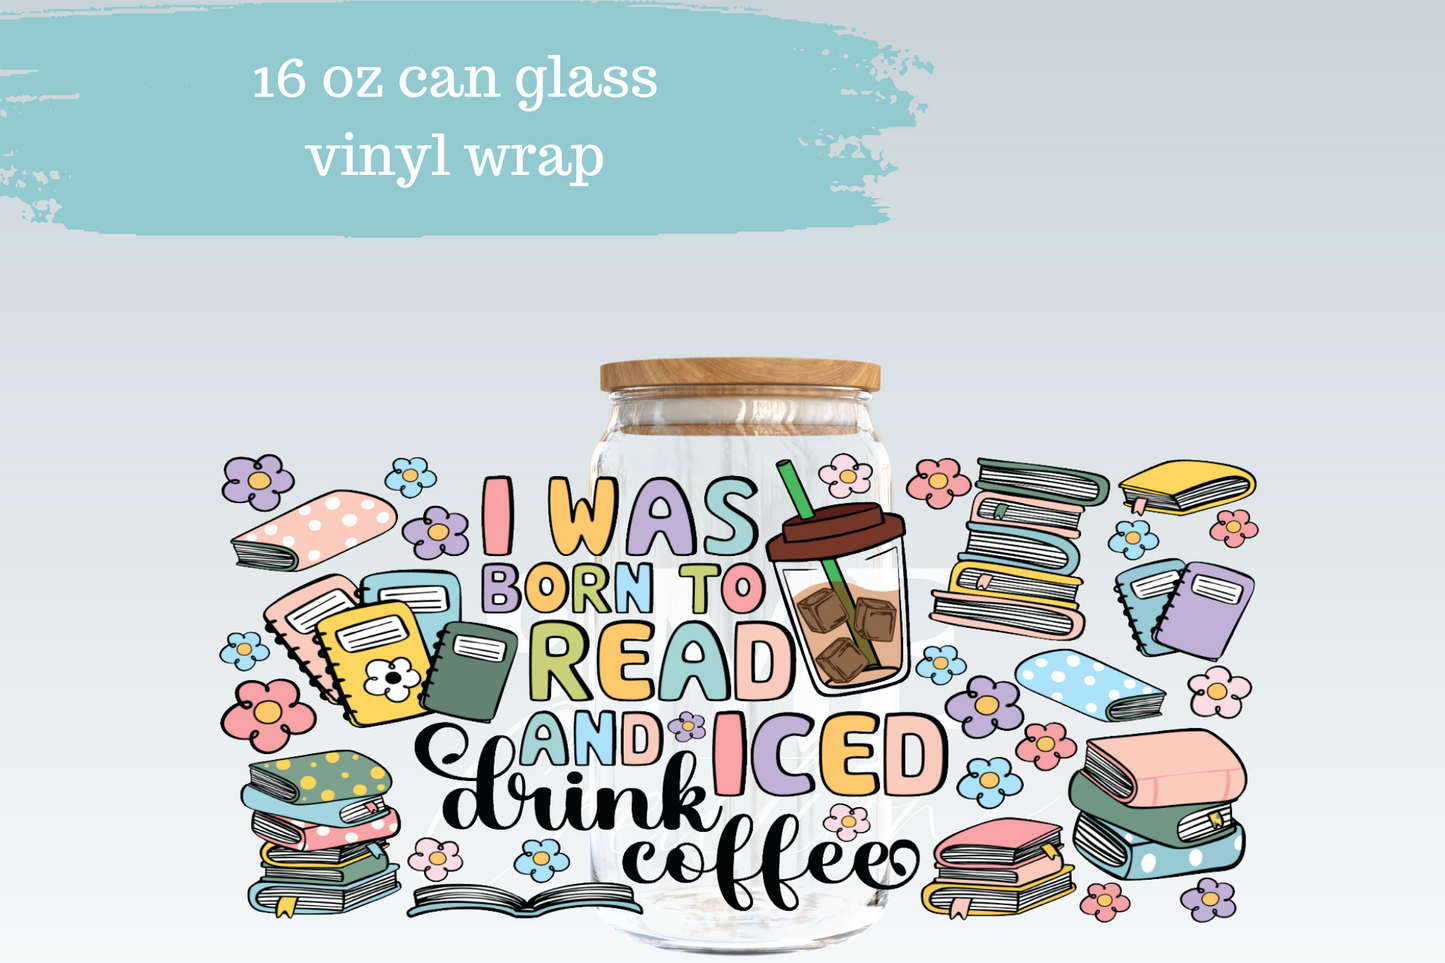 Born to Read & Drink Iced Coffee | 16 oz Can Glass Libbey Wrap